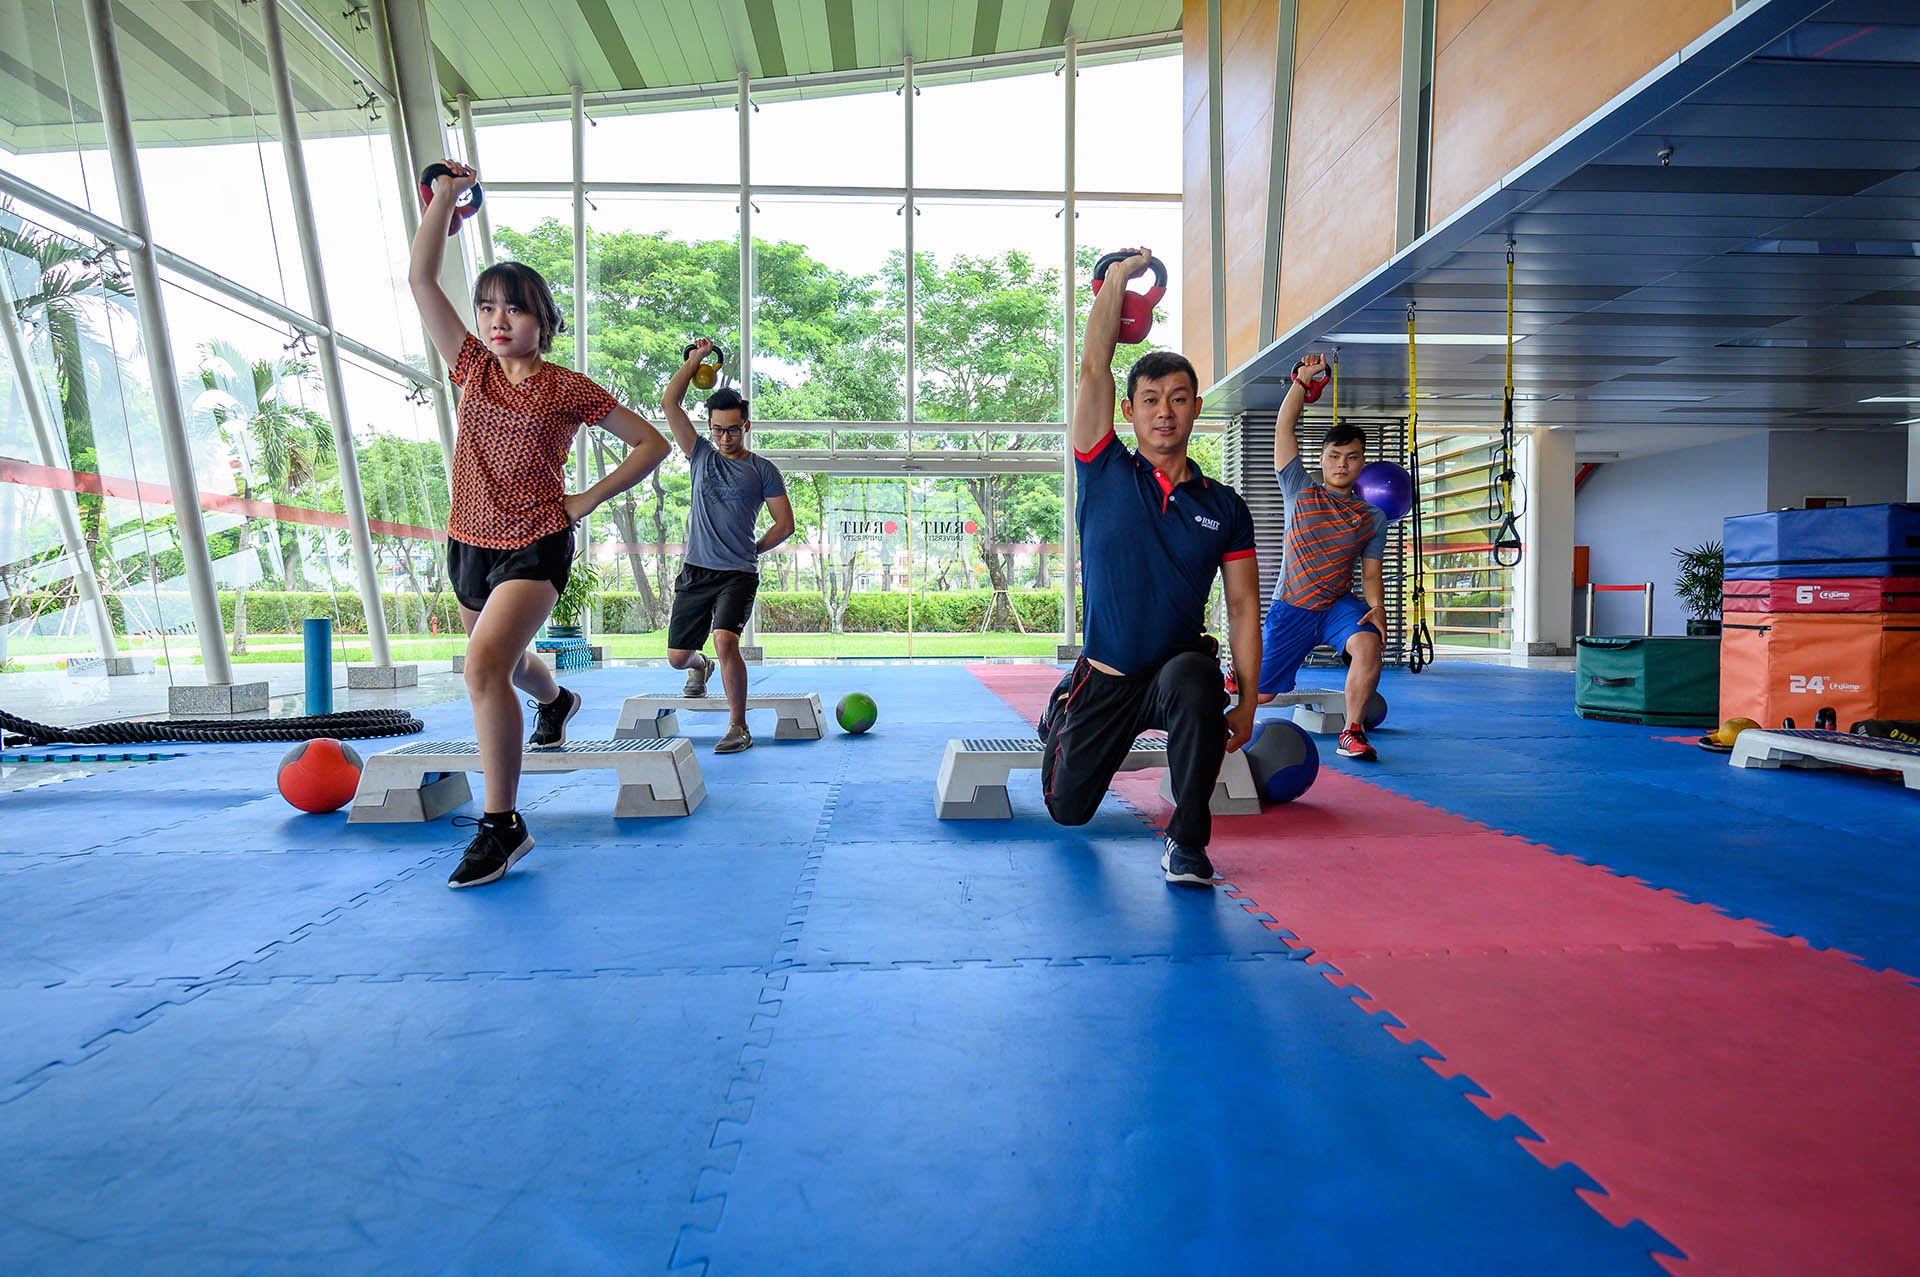 sgs students exercise in rec area  